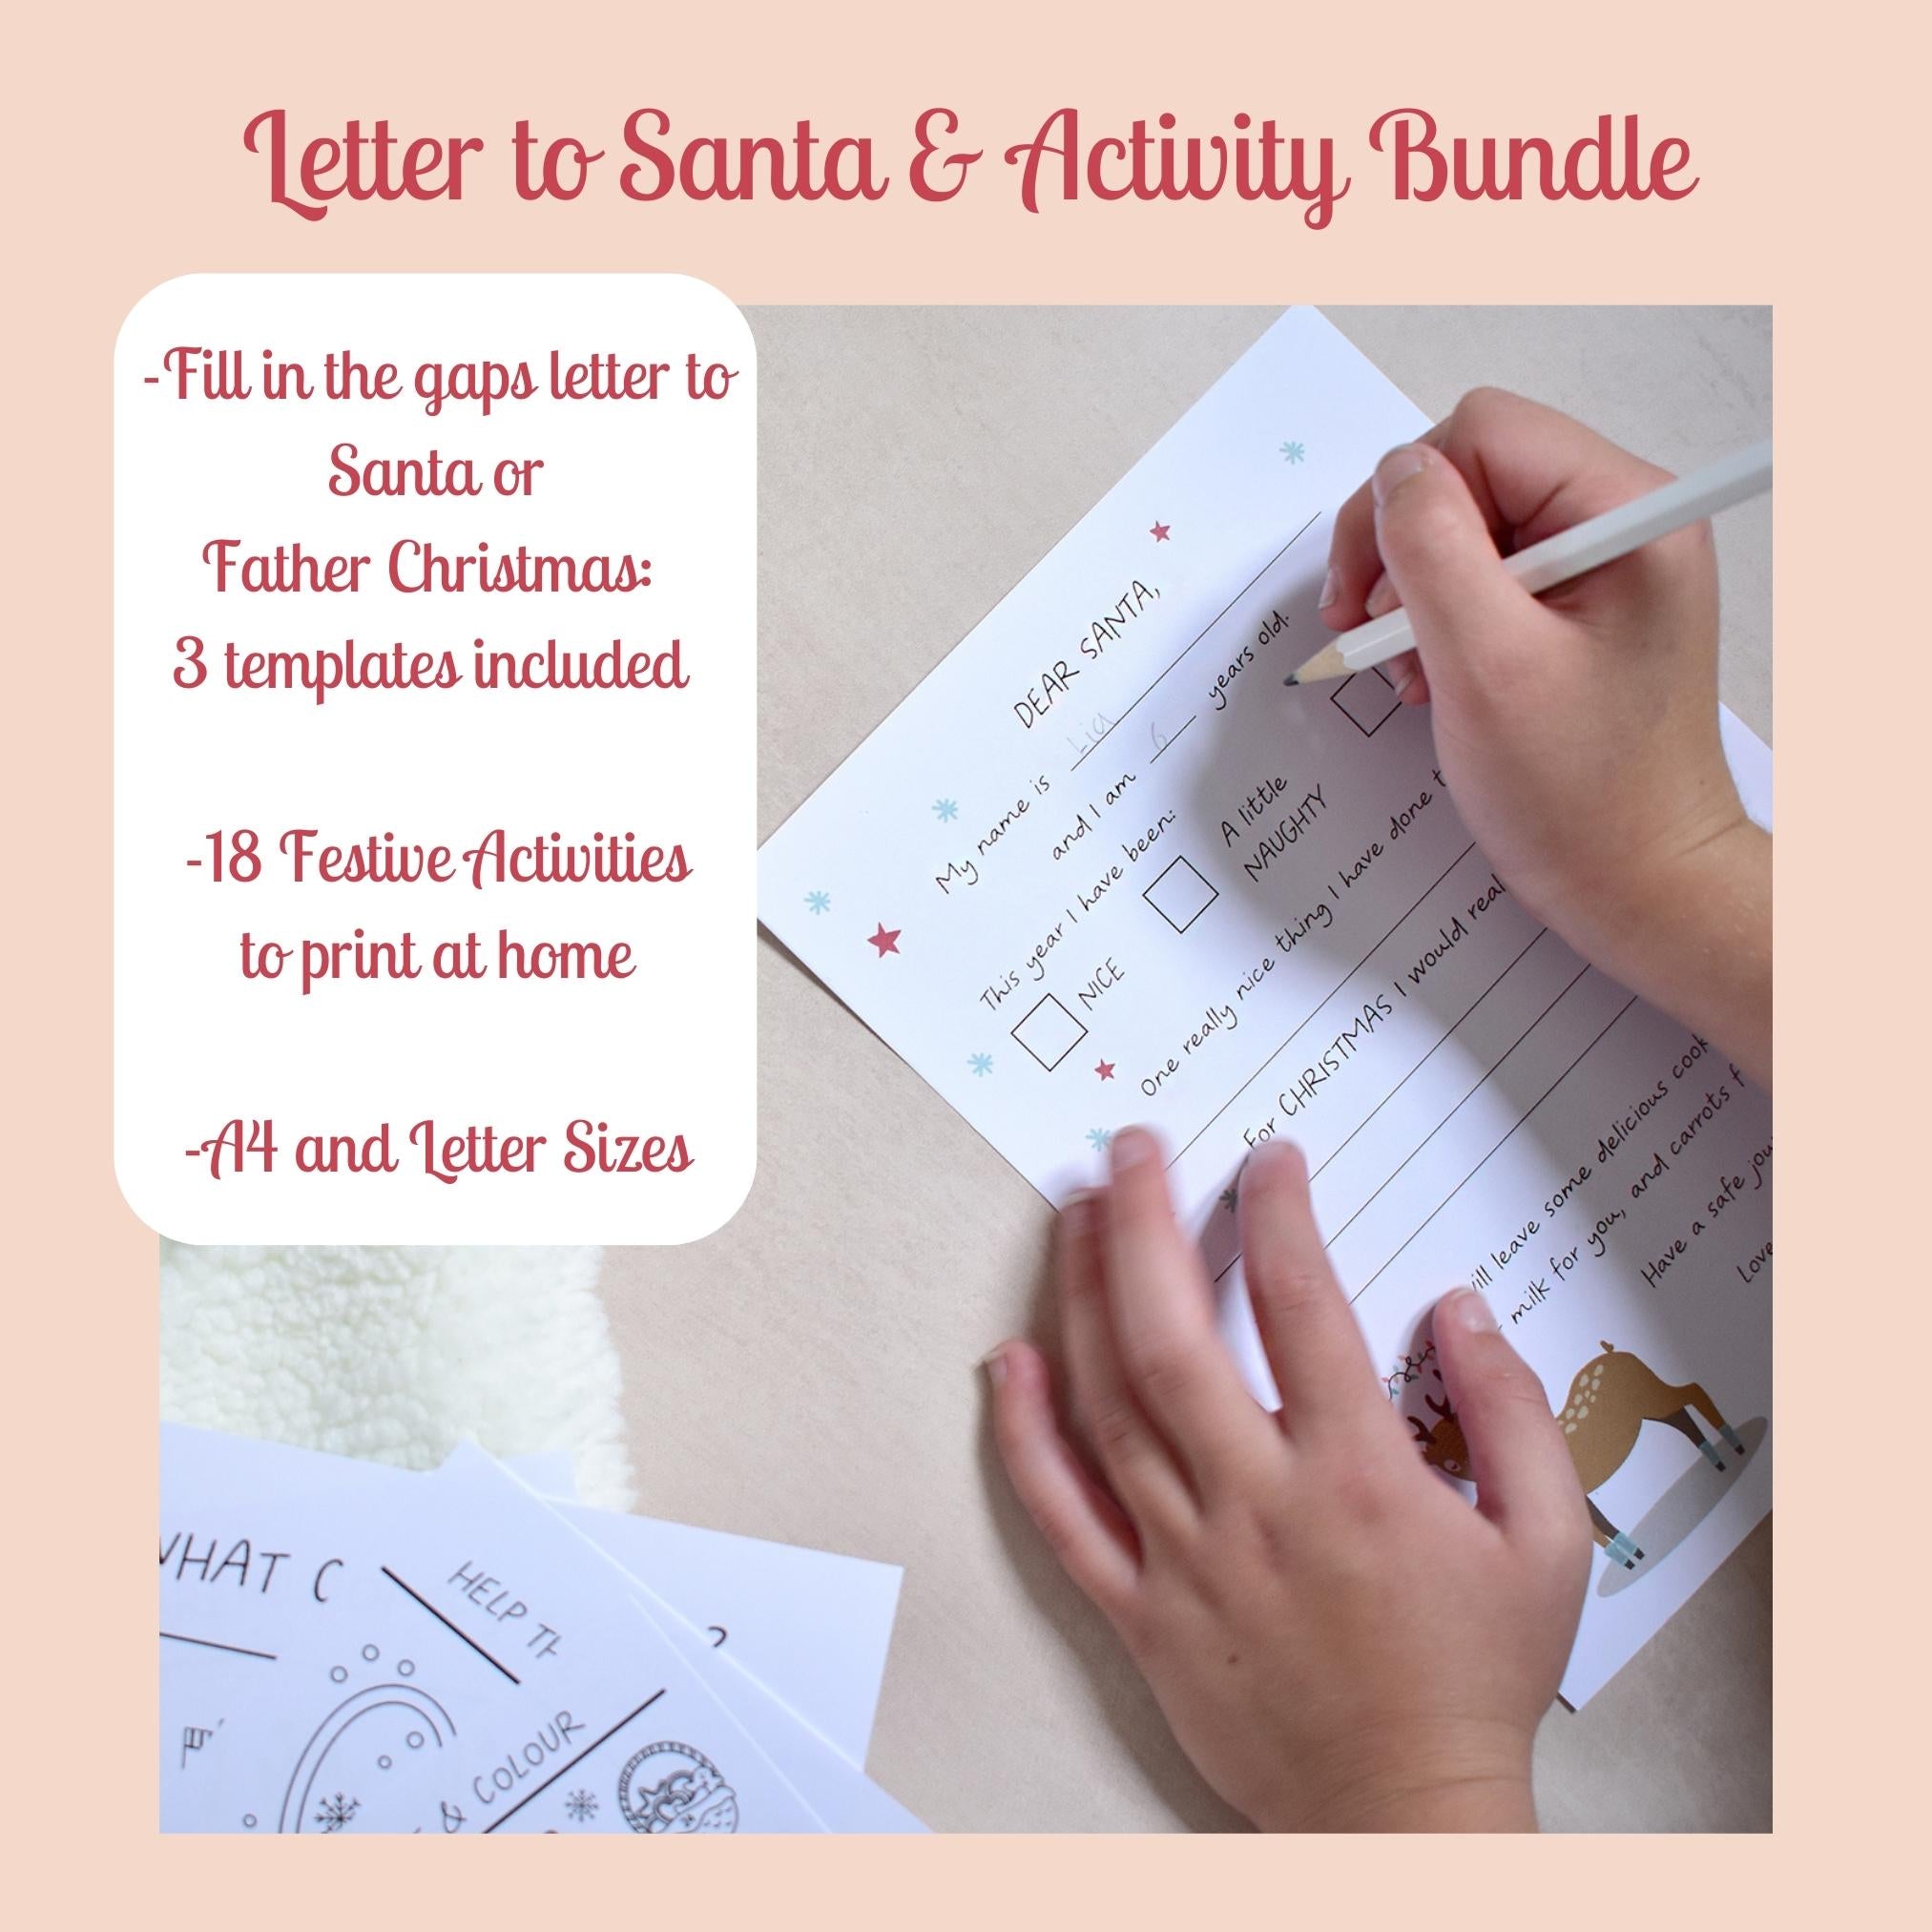 Printable Letter to Santa & 18 Festive Activities